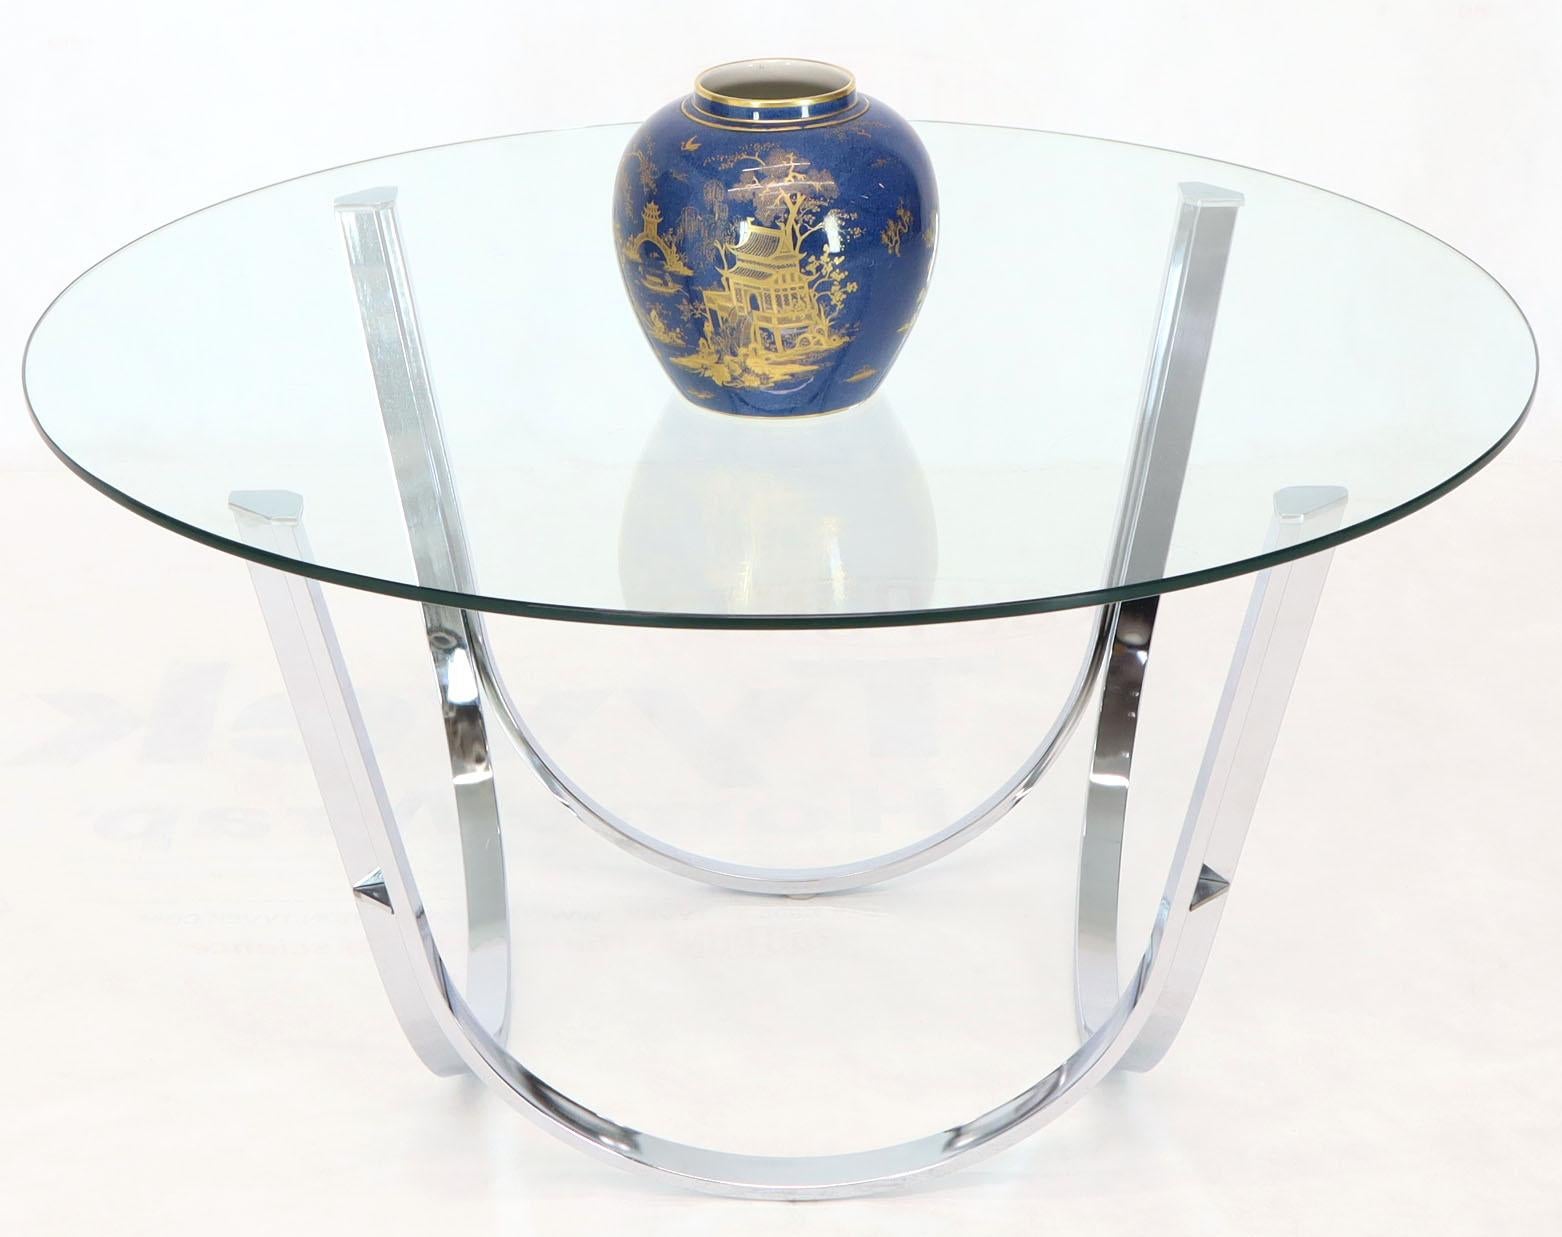 Tall Round Center Coffee Table Chrome and Glass In Good Condition For Sale In Rockaway, NJ